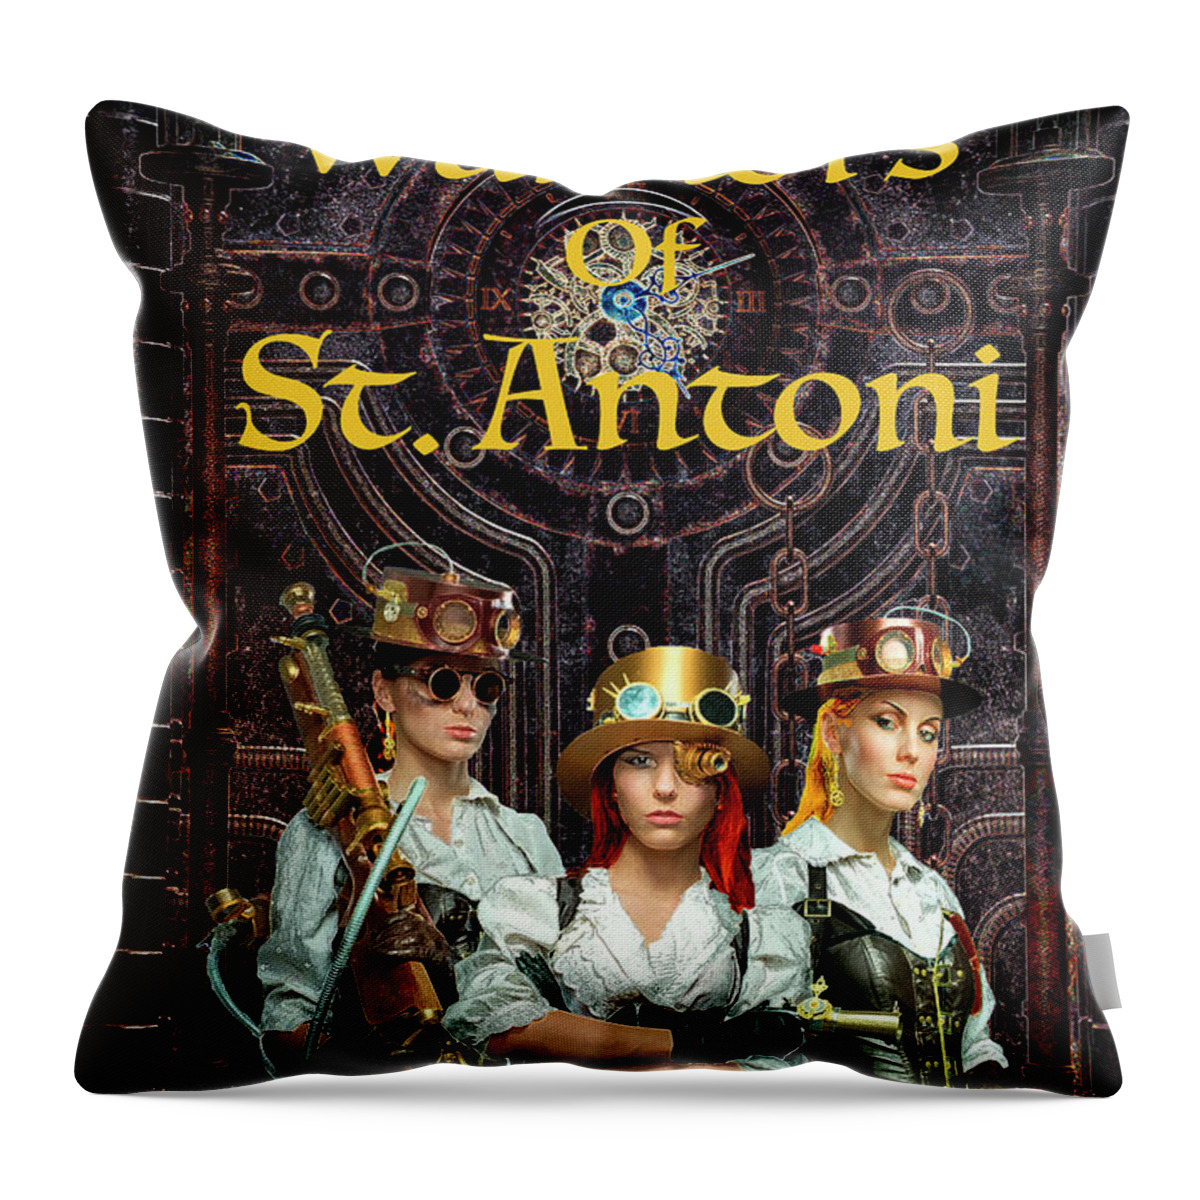 Alien Worlds Romance Throw Pillow featuring the digital art Warriors of St. Antoni by Gail Daley